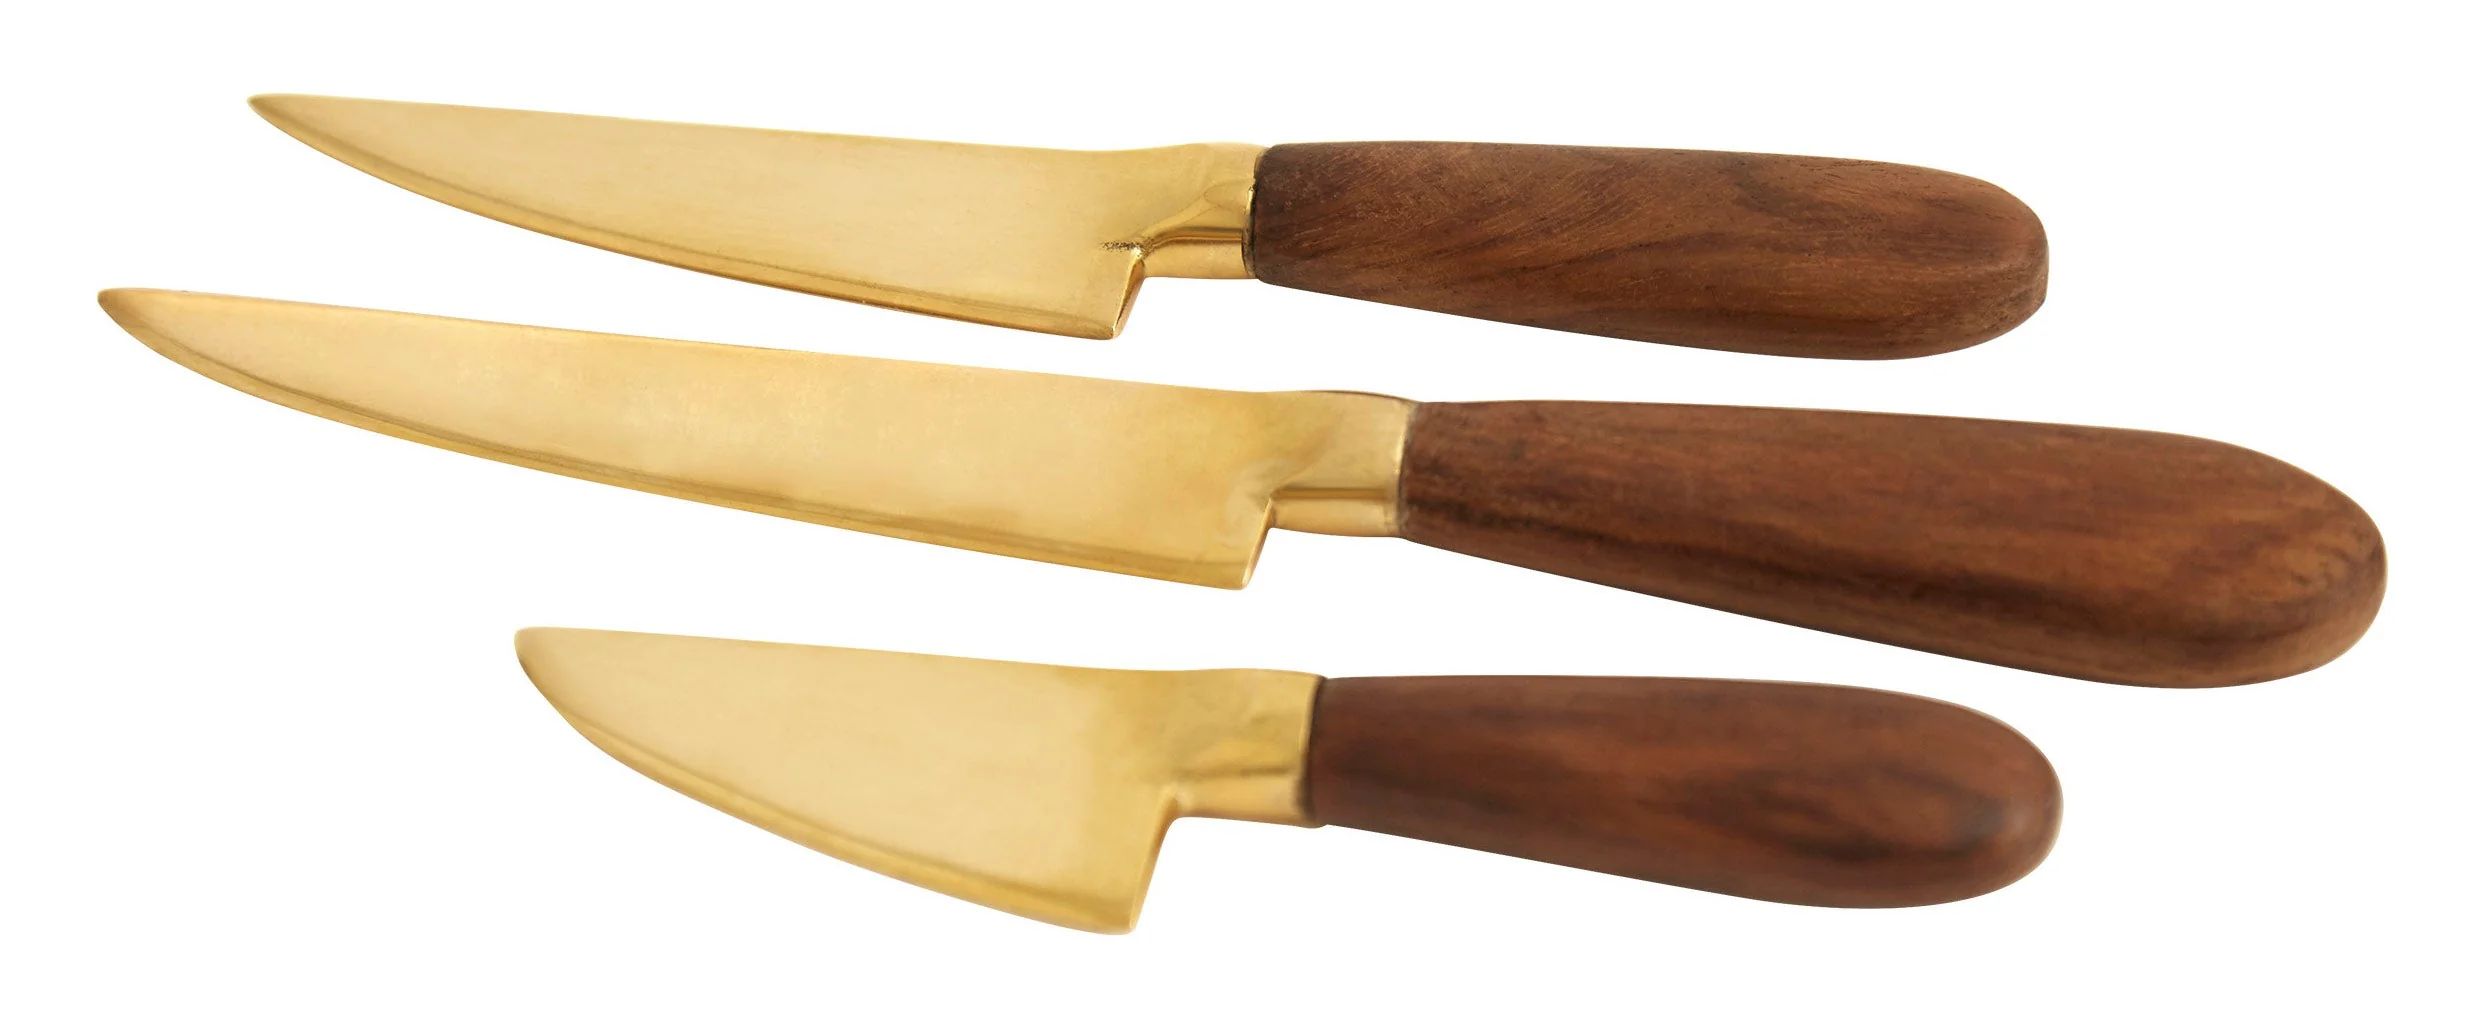 Rosewood & Brass Knives | Jayson Home